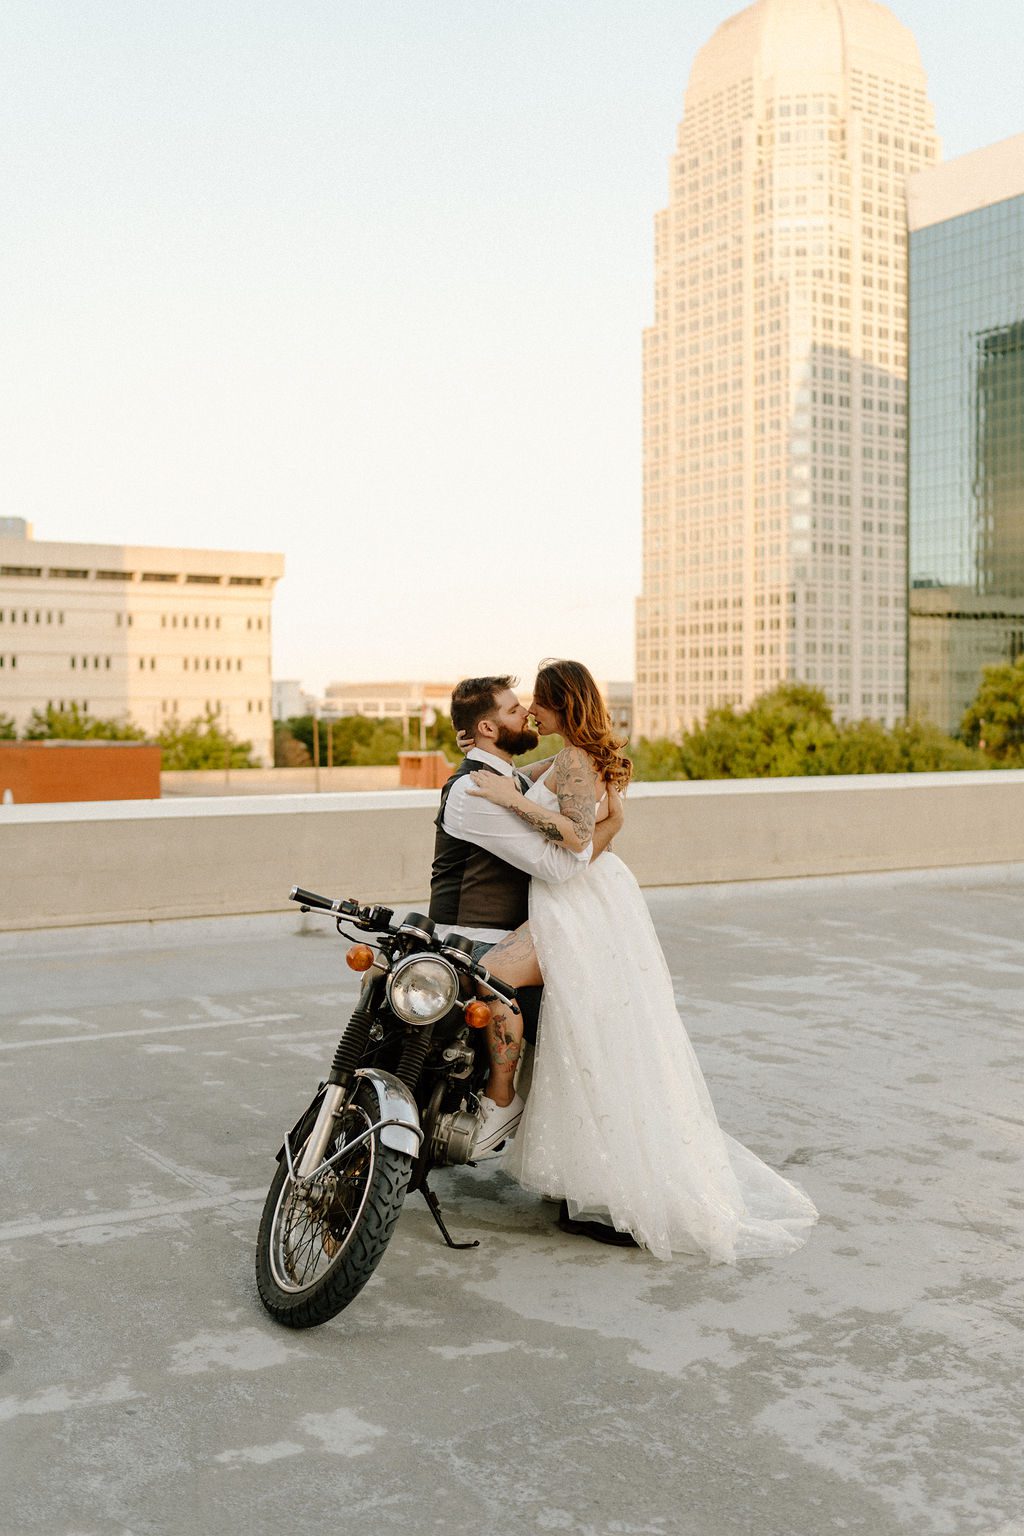 fun urban city elopement With Motorcycle on rooftop